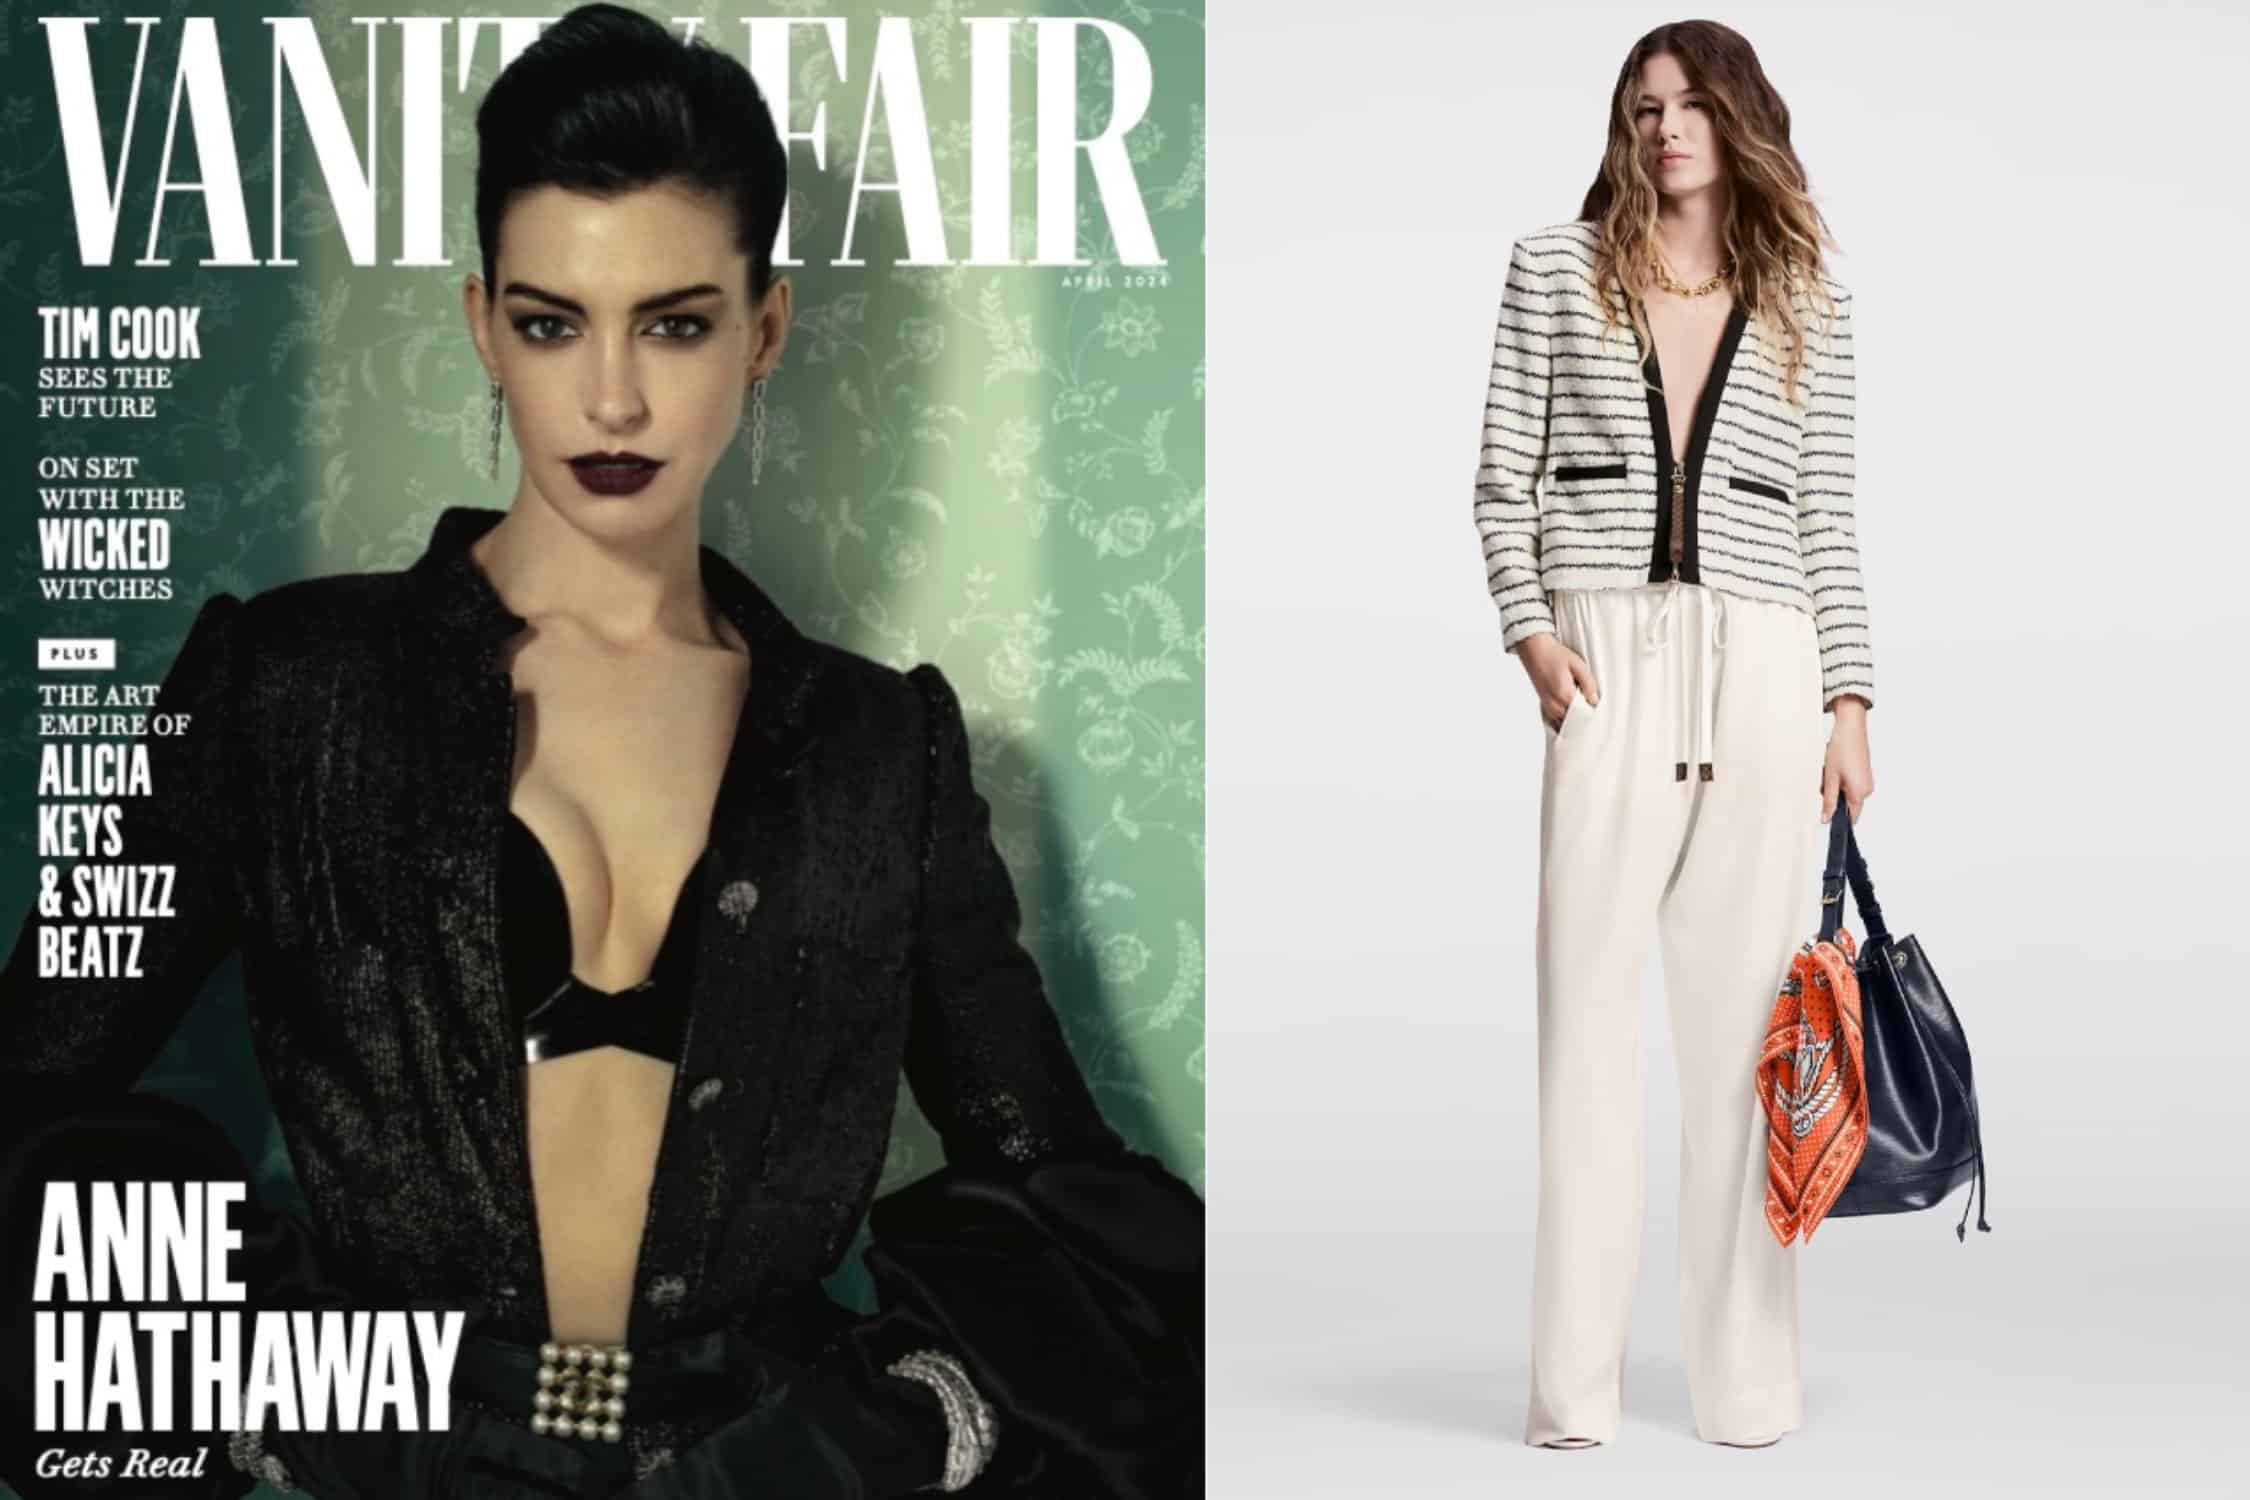 Rihanna and Anne Hathaway’s Covers, Kith’s New Collab, & More